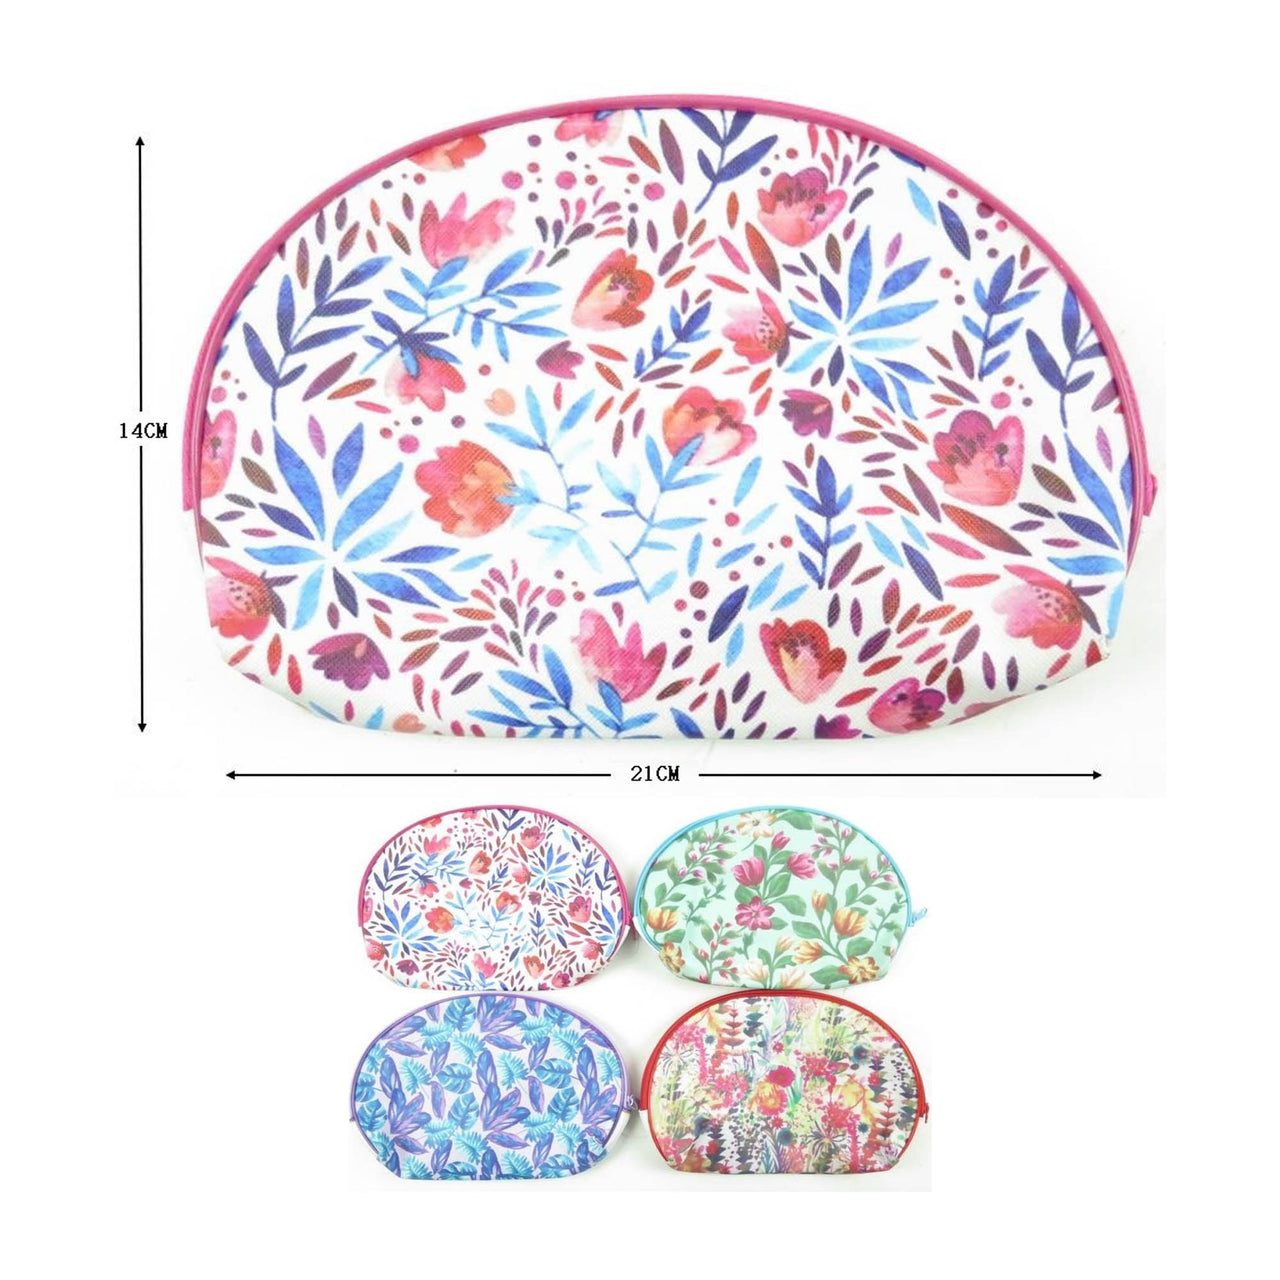 MK- Cosmetic & Toiletry Pouch With Flower Printed BA1905 1DZ